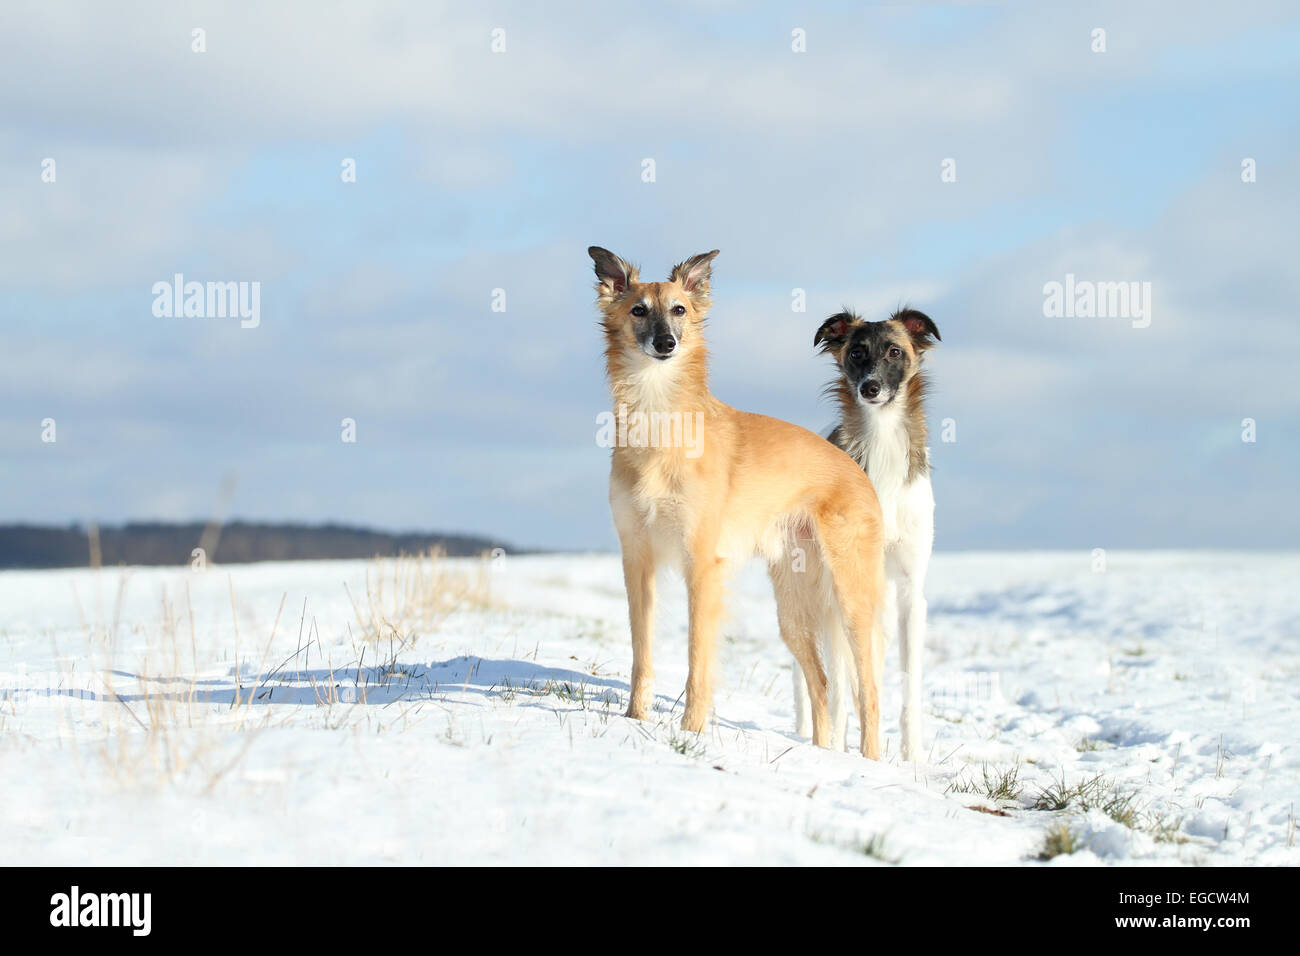 Silken Windsprite, whippets, dog standing in the snow, Rhineland-Palatinate, Germany Stock Photo